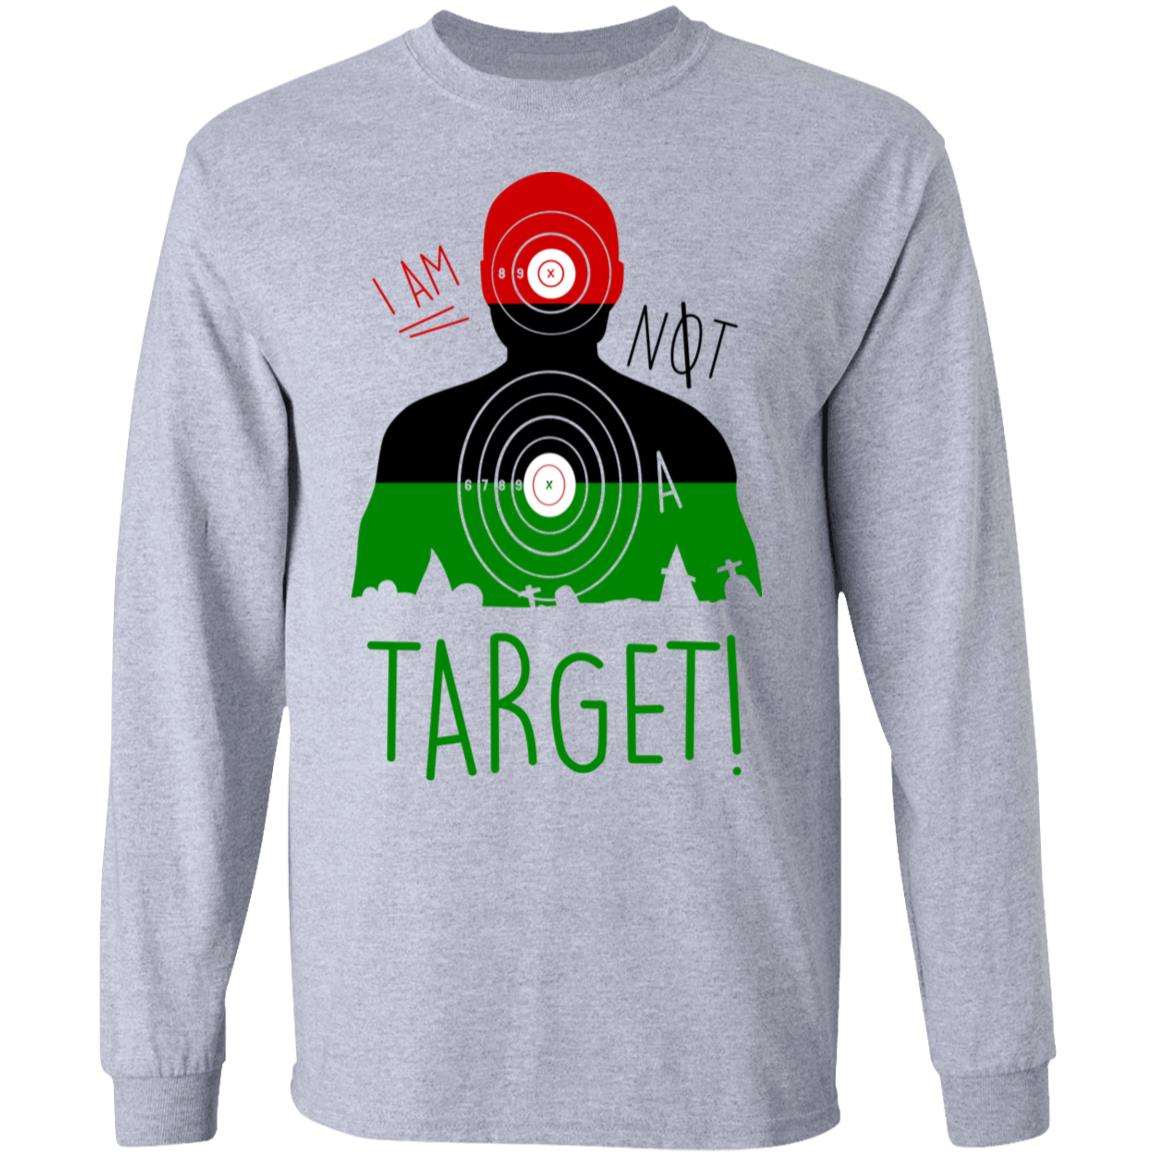 Not the Bullseye but Still a Target, Quotes, Black Essential T-Shirt for  Sale by Wintre2